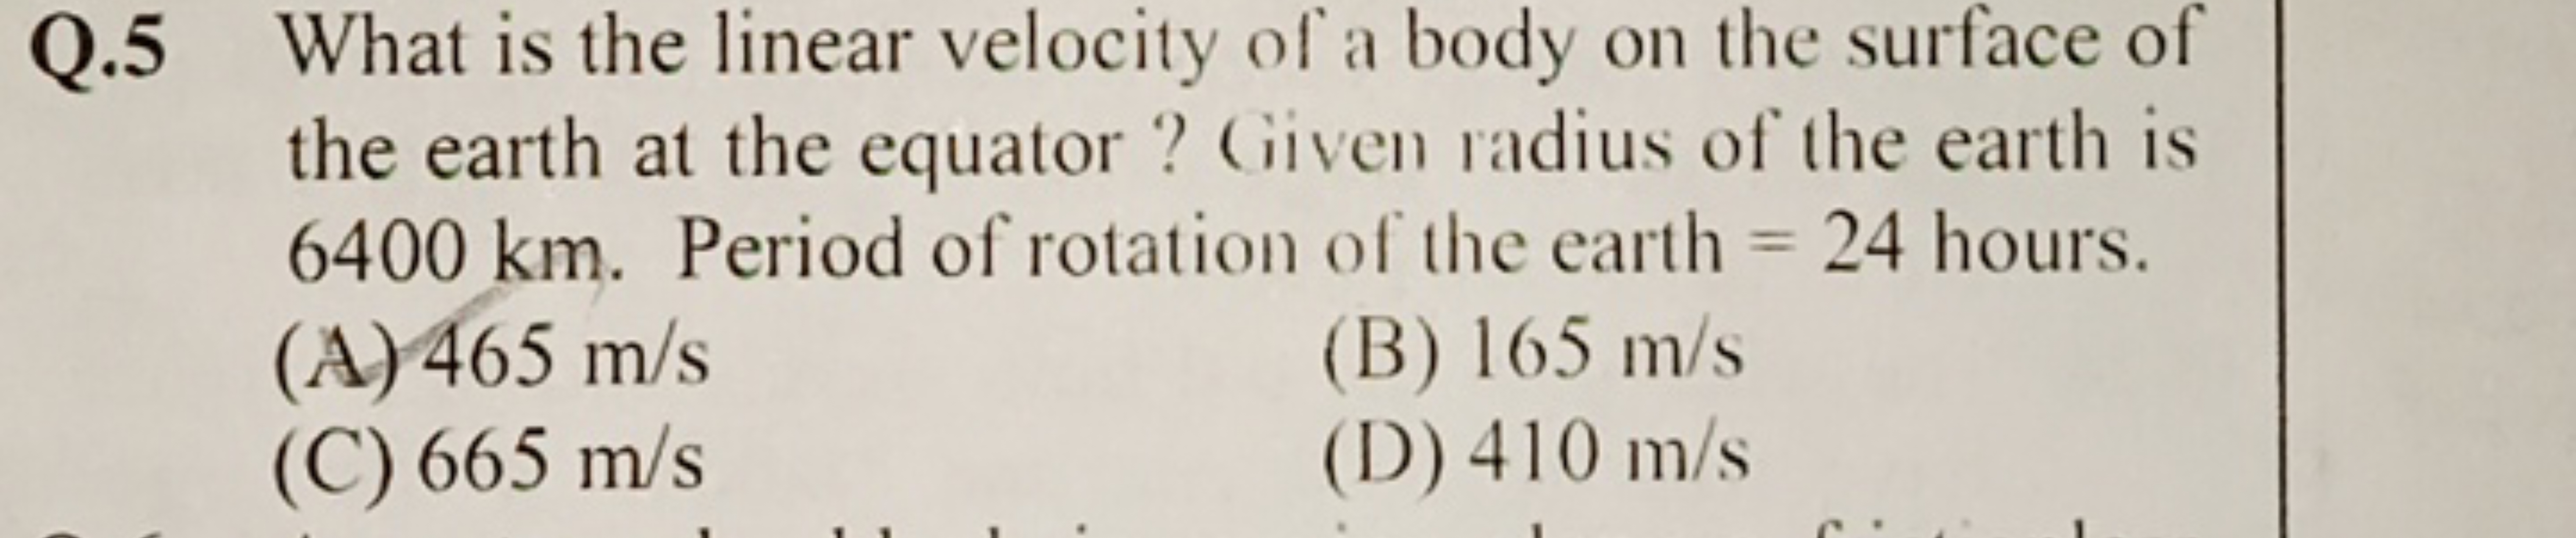 Q.5 What is the linear velocity of a body on the surface of the earth 